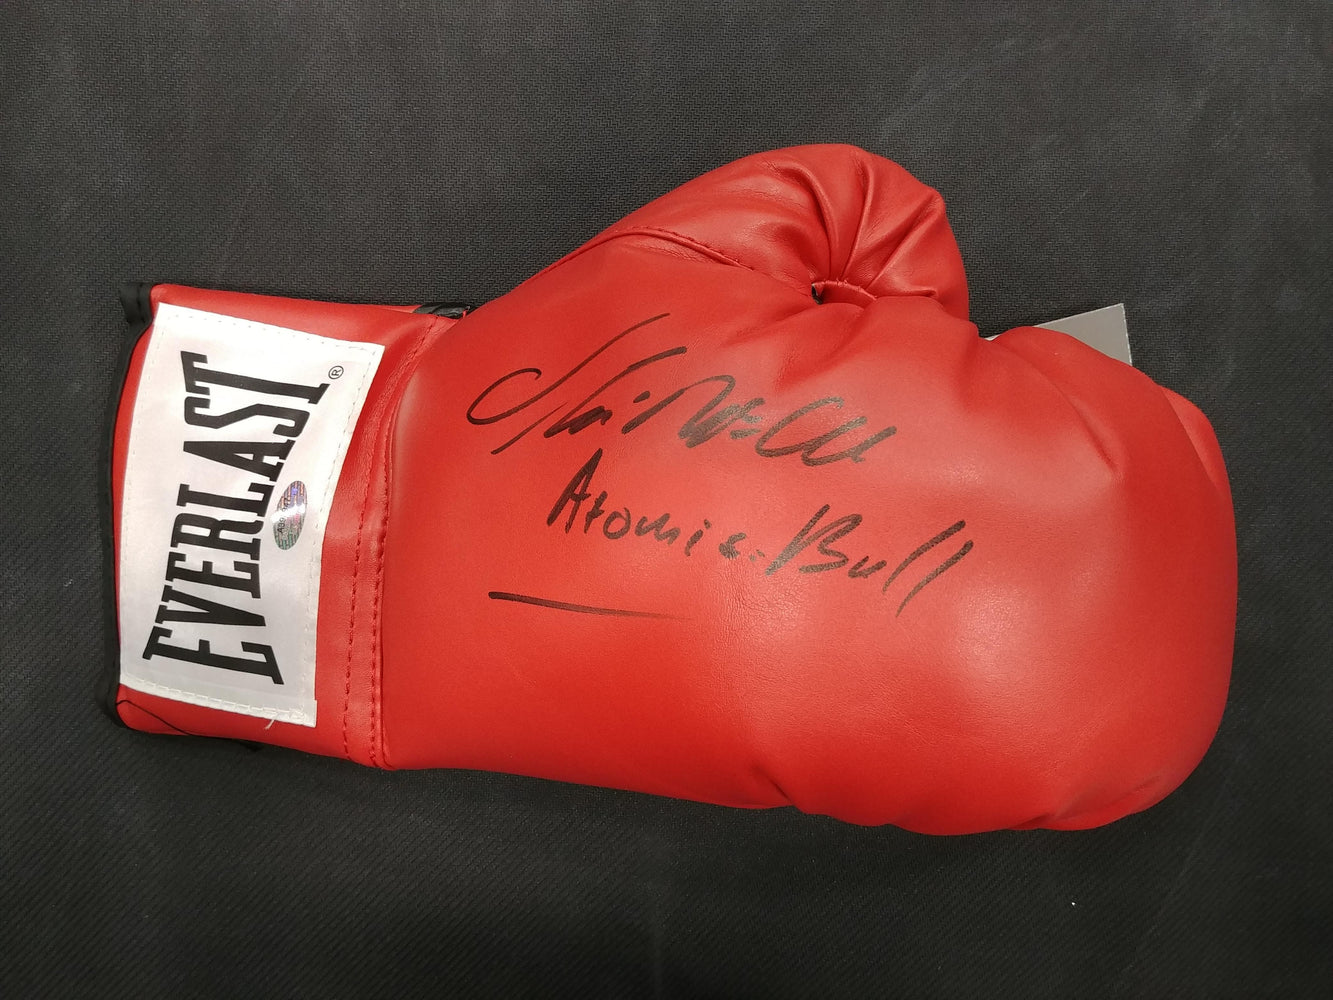 Oliver McCall Autographed Boxing Glove - Pastime Sports & Games